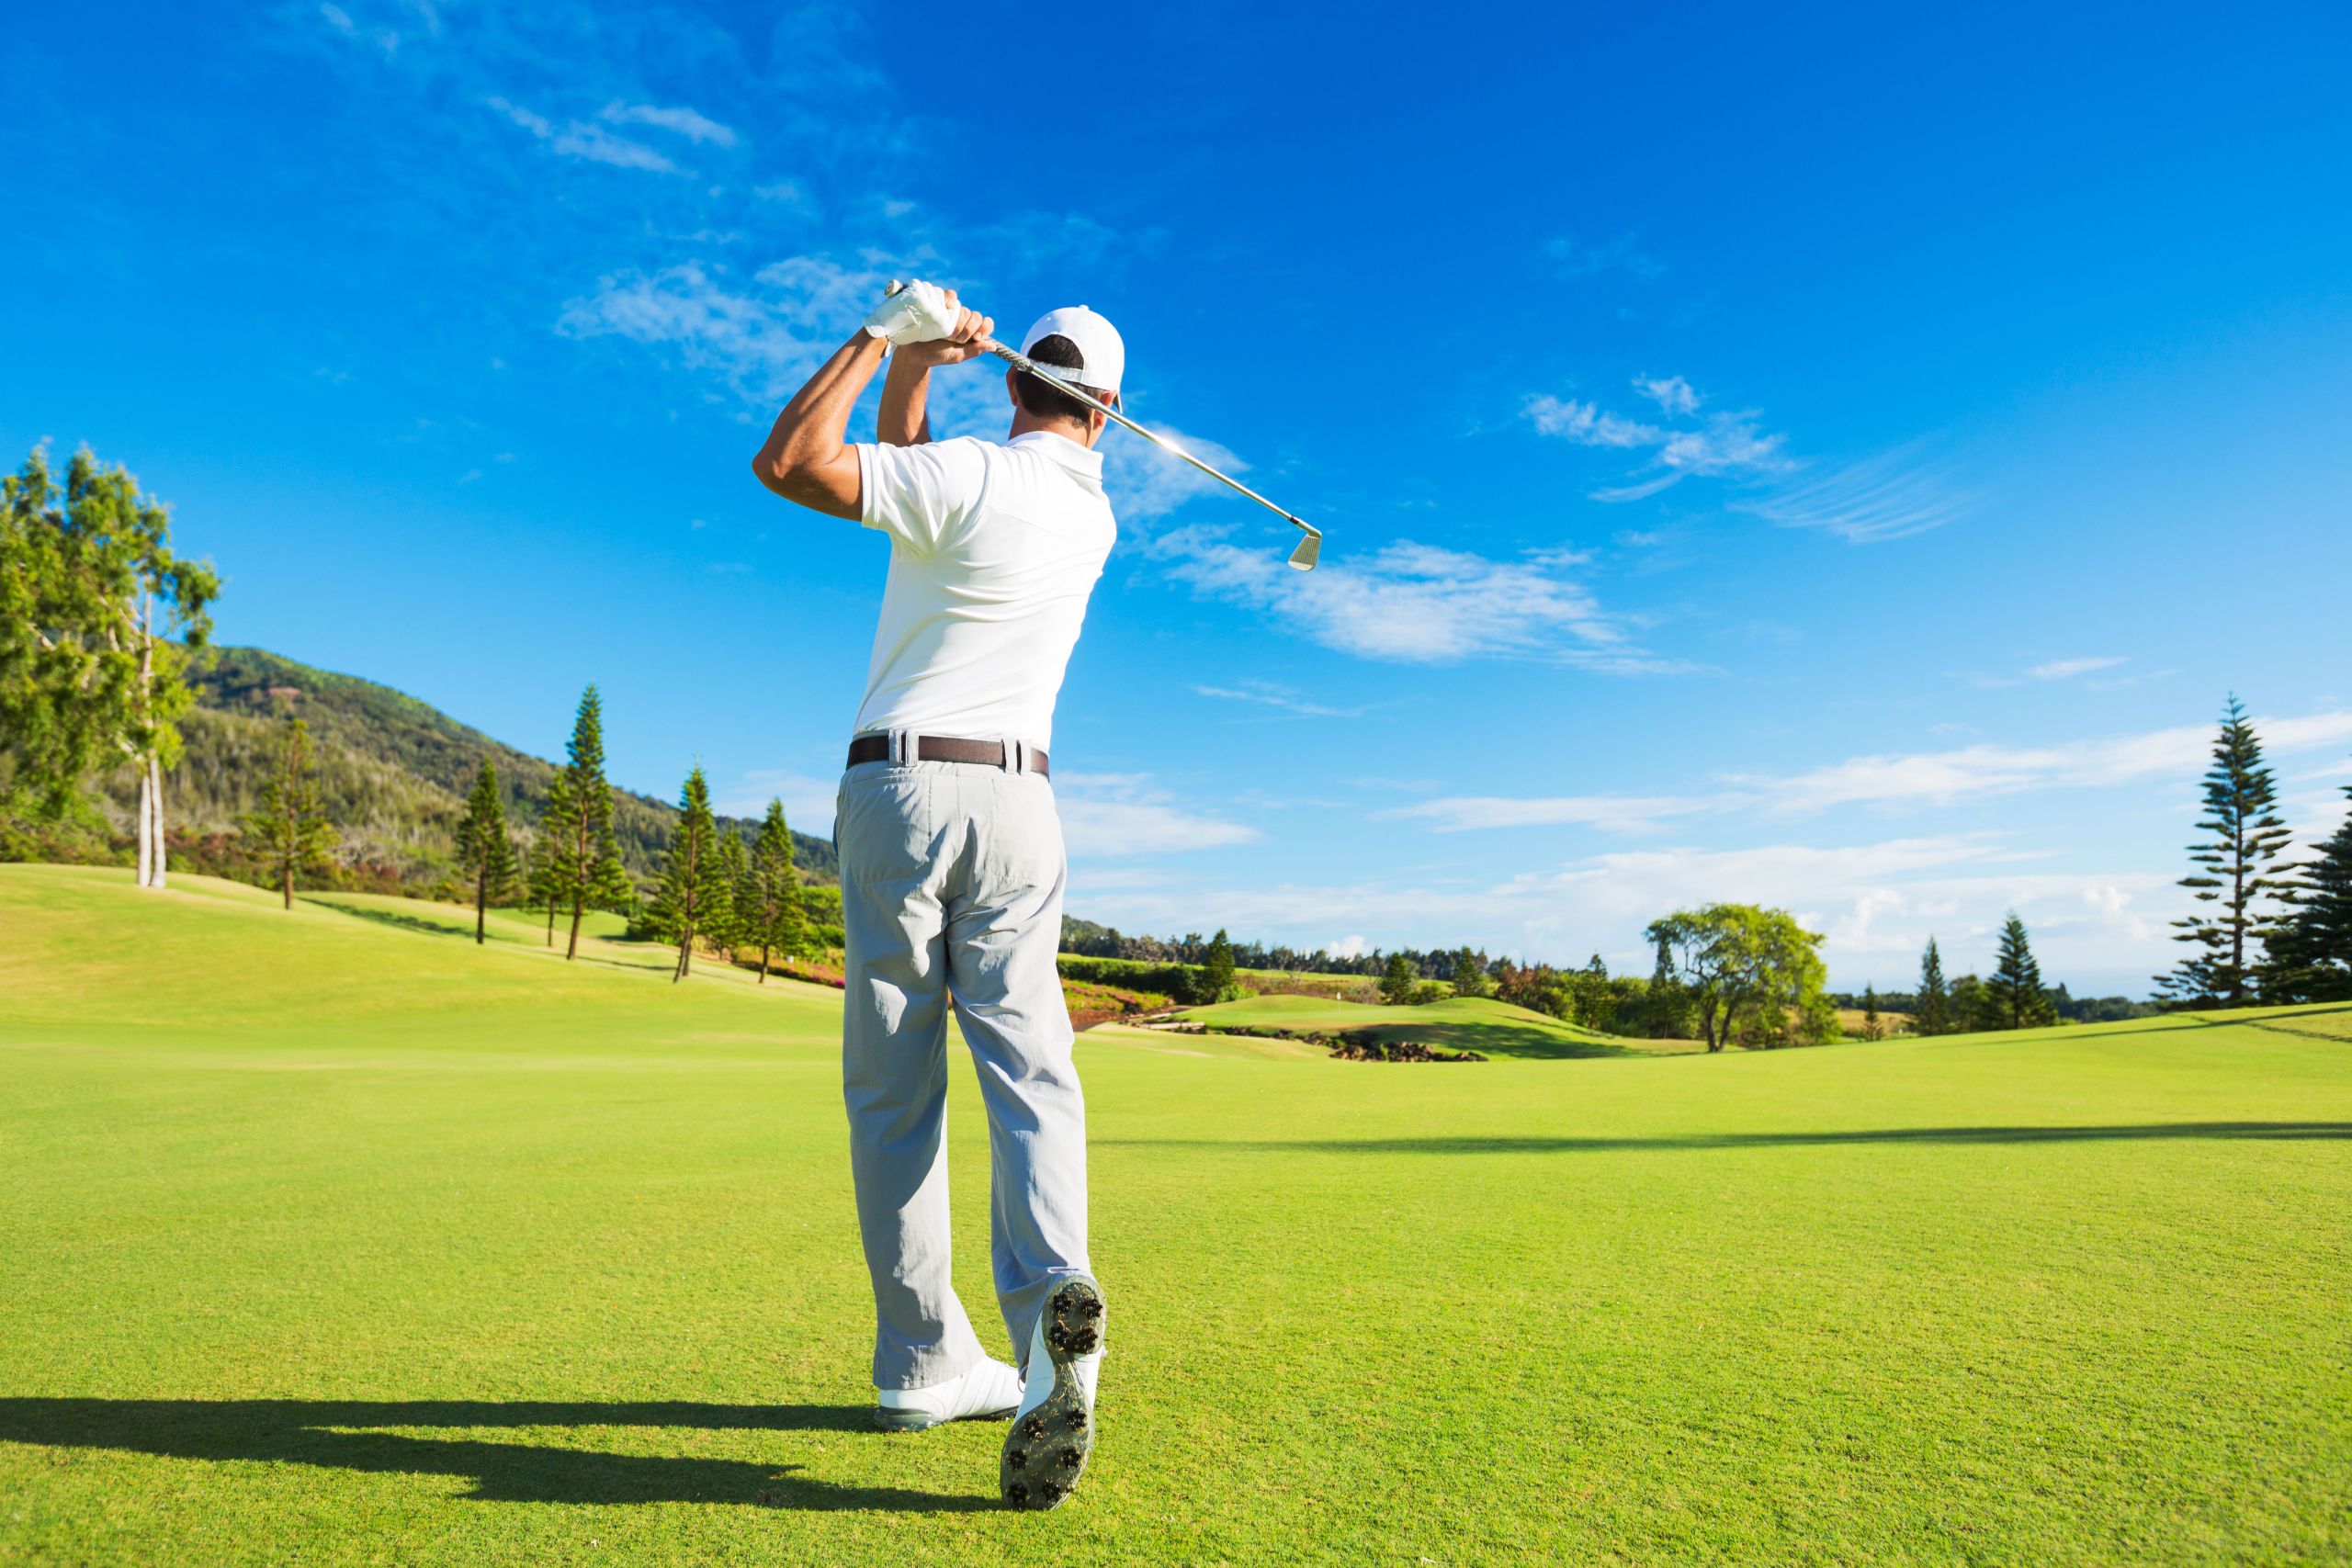 Golfers: Don't be handicapped with foot pain